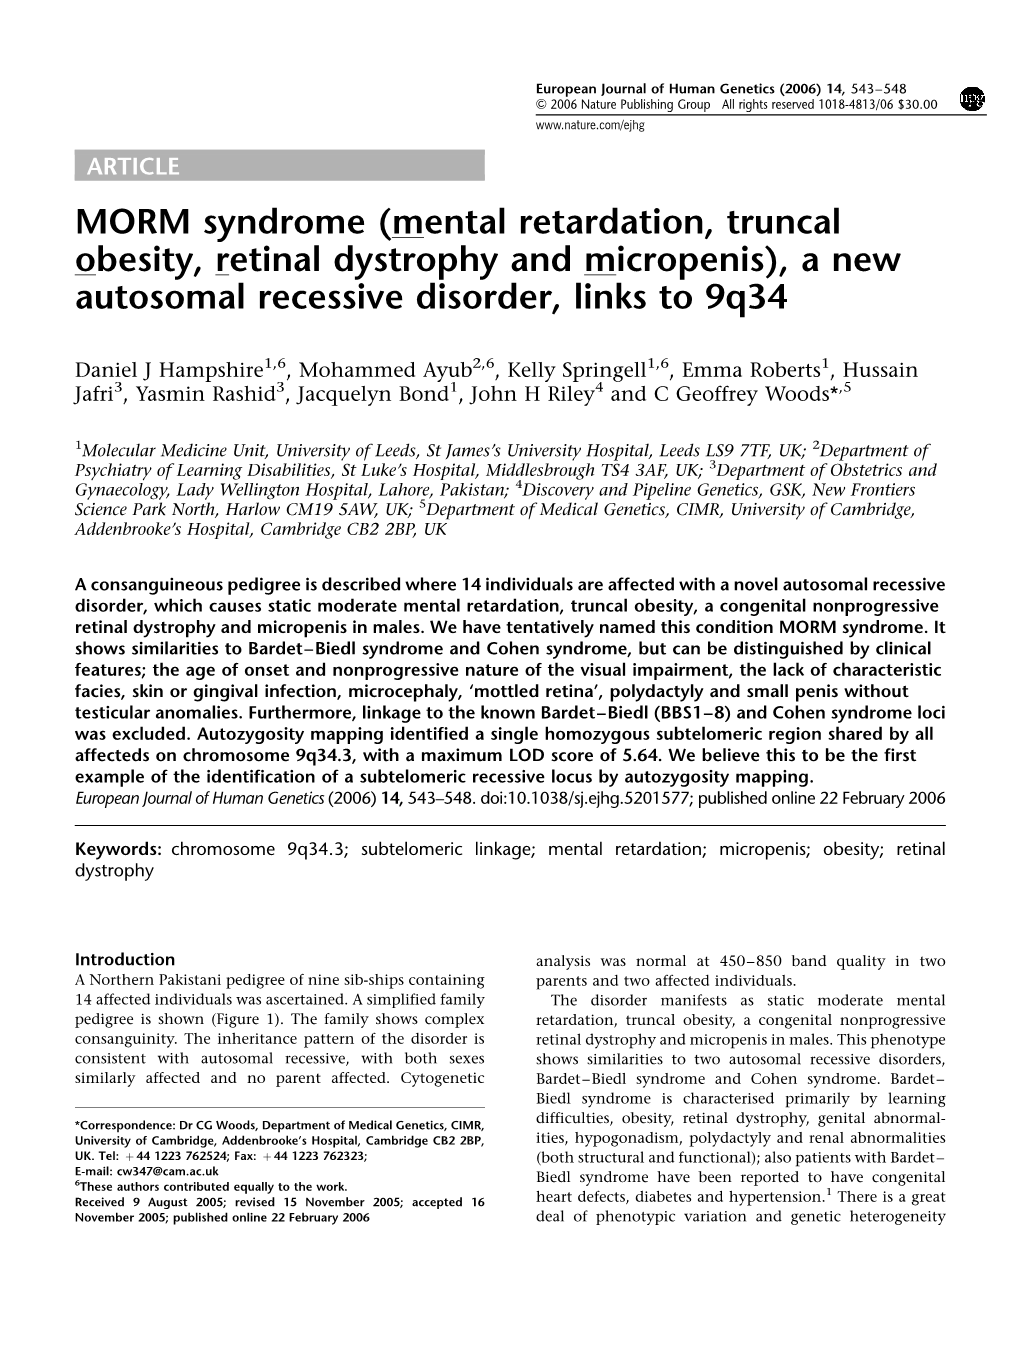 MORM Syndrome (Mental Retardation, Truncal Obesity, Retinal Dystrophy and Micropenis), a New Autosomal Recessive Disorder, Links to 9Q34